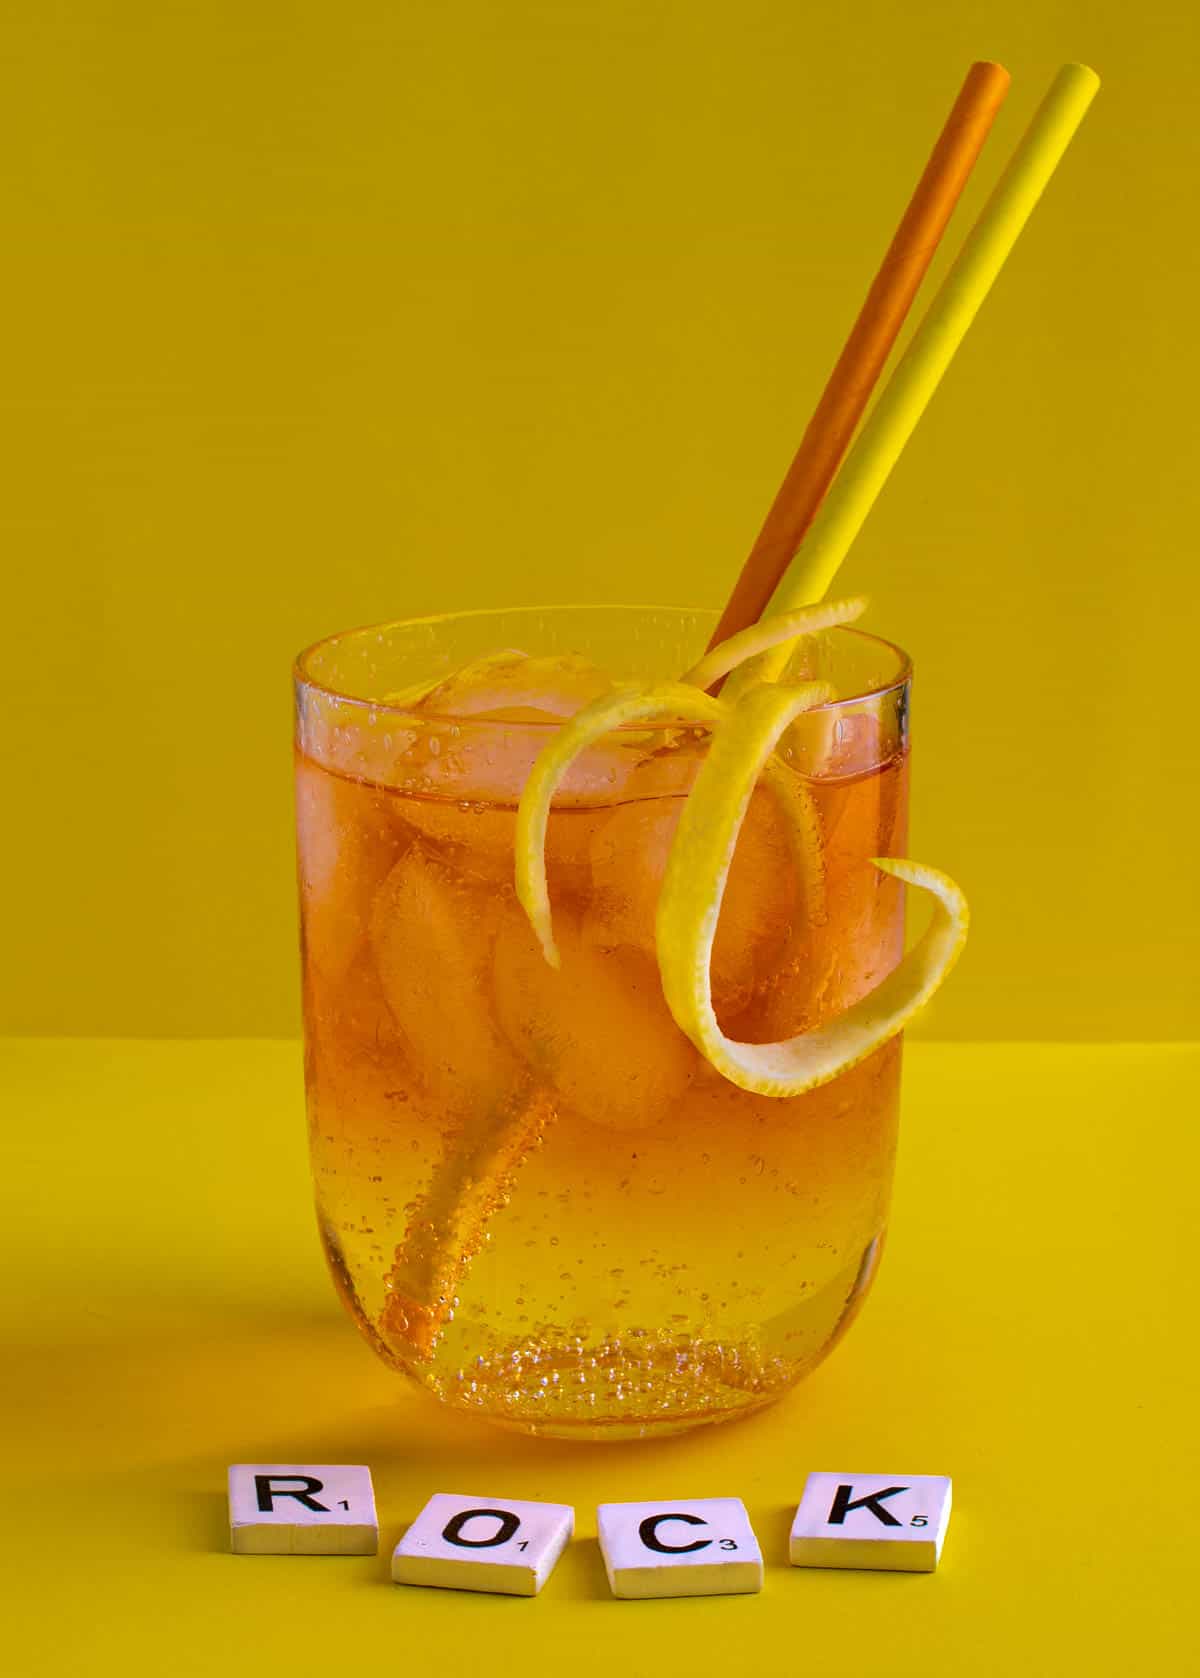 A medium glass of Rock shandy on a yellow background with an orange and yellow straw.